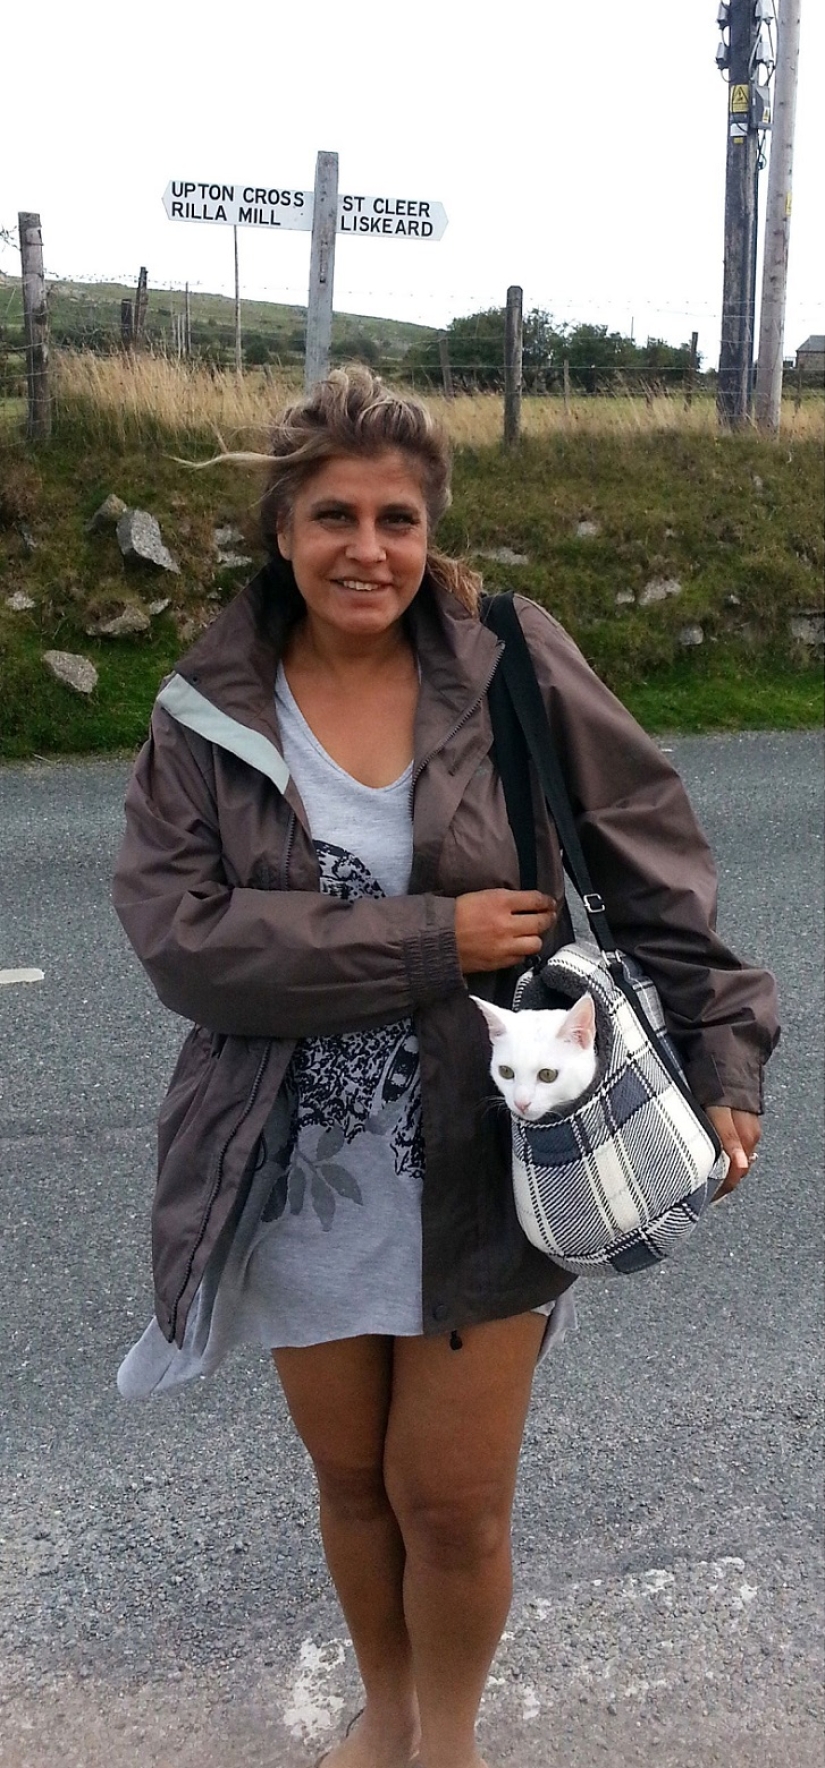 Cat traveling with its owners